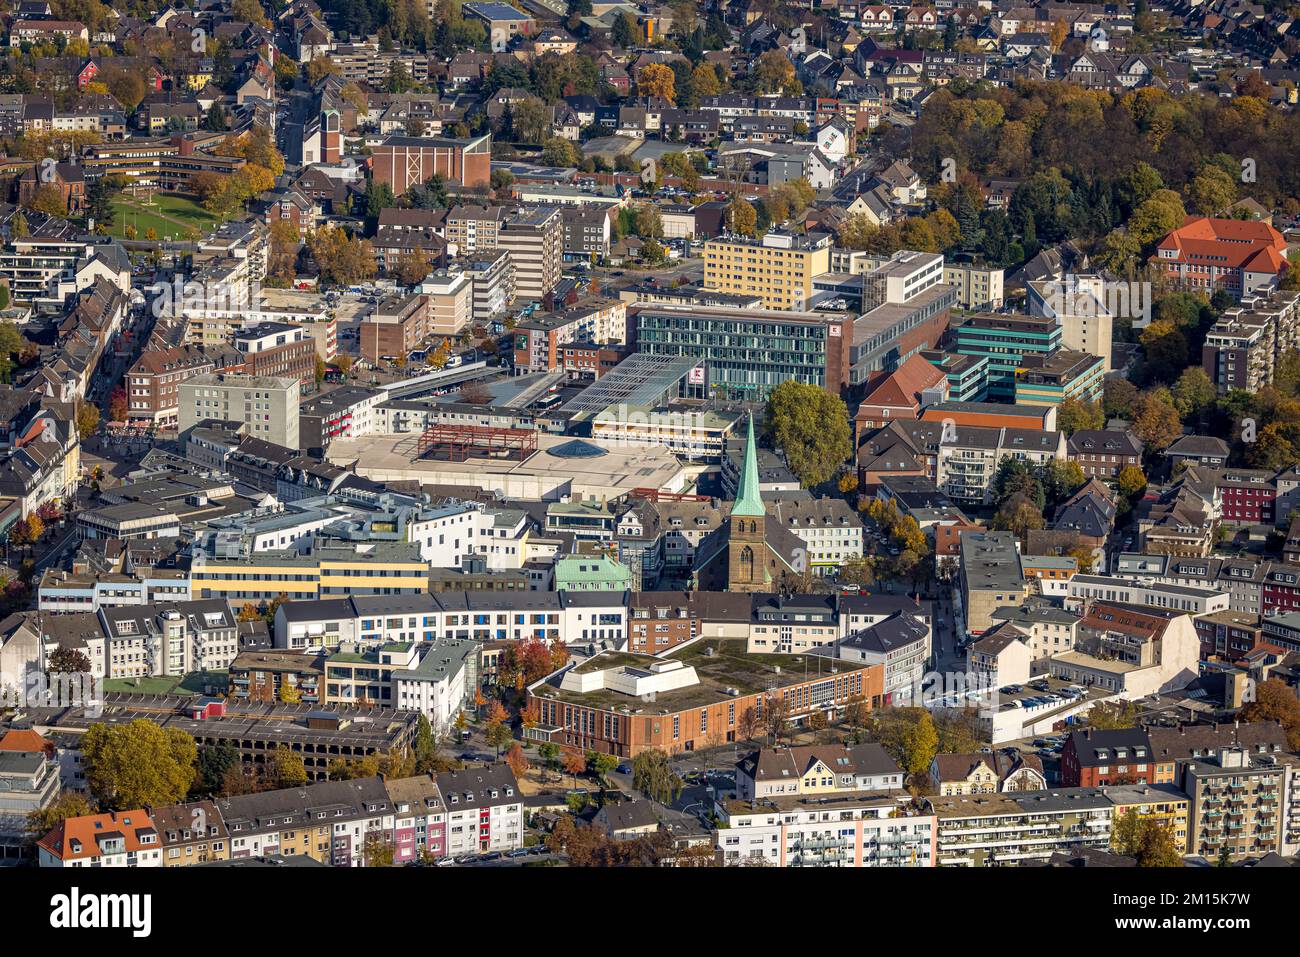 Aerial view, downtown with catholic church St. Cyriakus in the district Altstadt in Bottrop, Ruhr area, North Rhine-Westphalia, Germany, Old Town, Bot Stock Photo